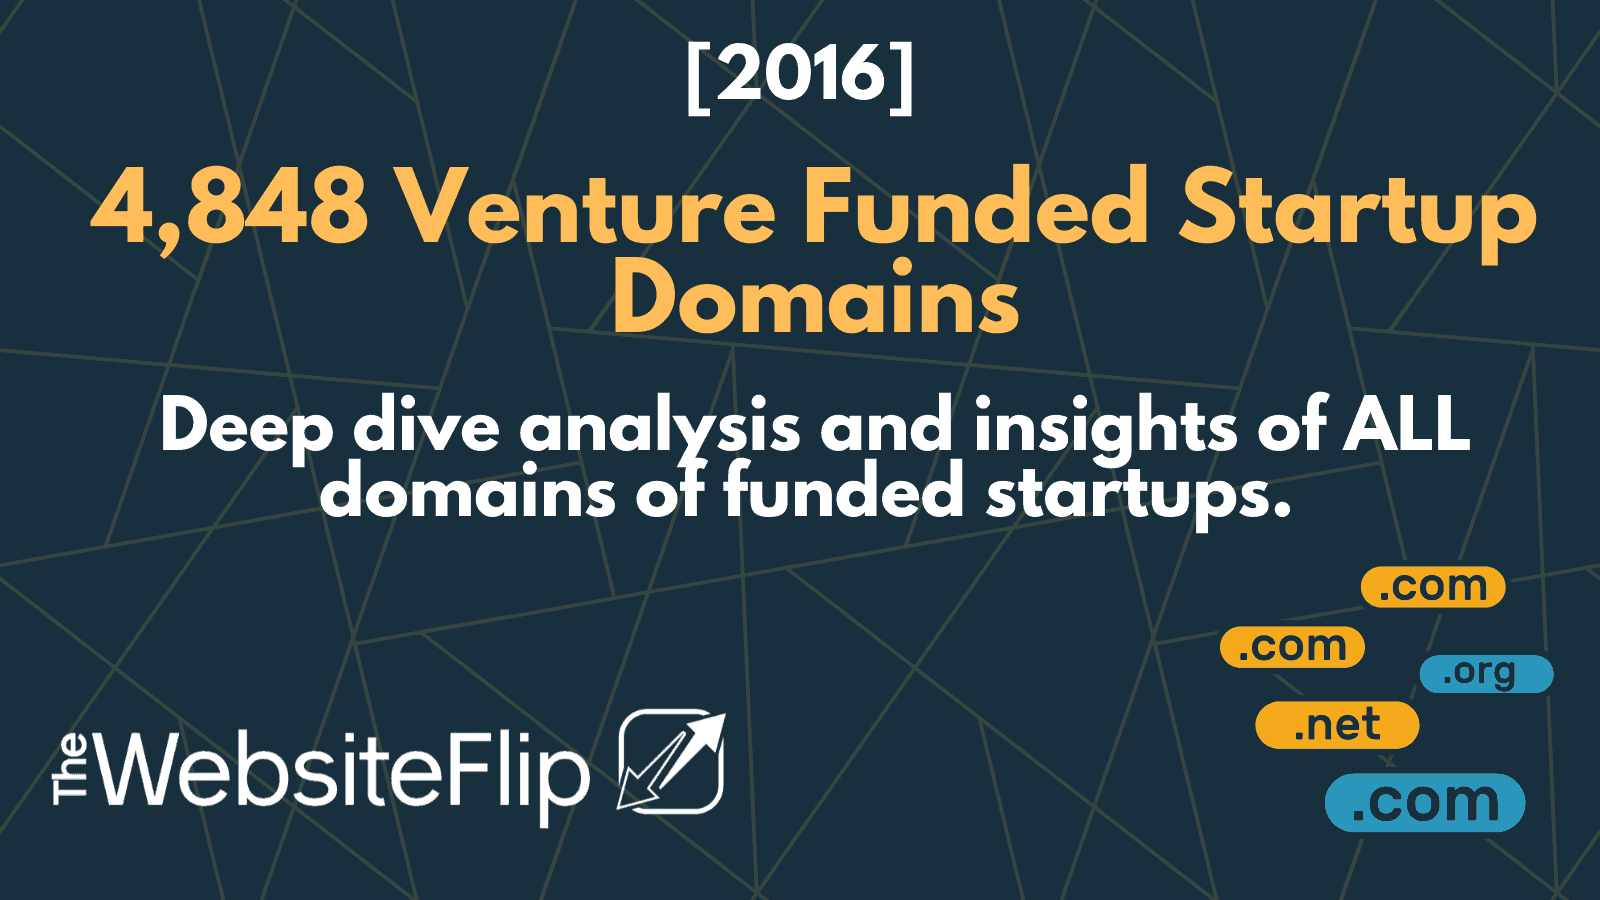 newly funded startups and their domains in 2016